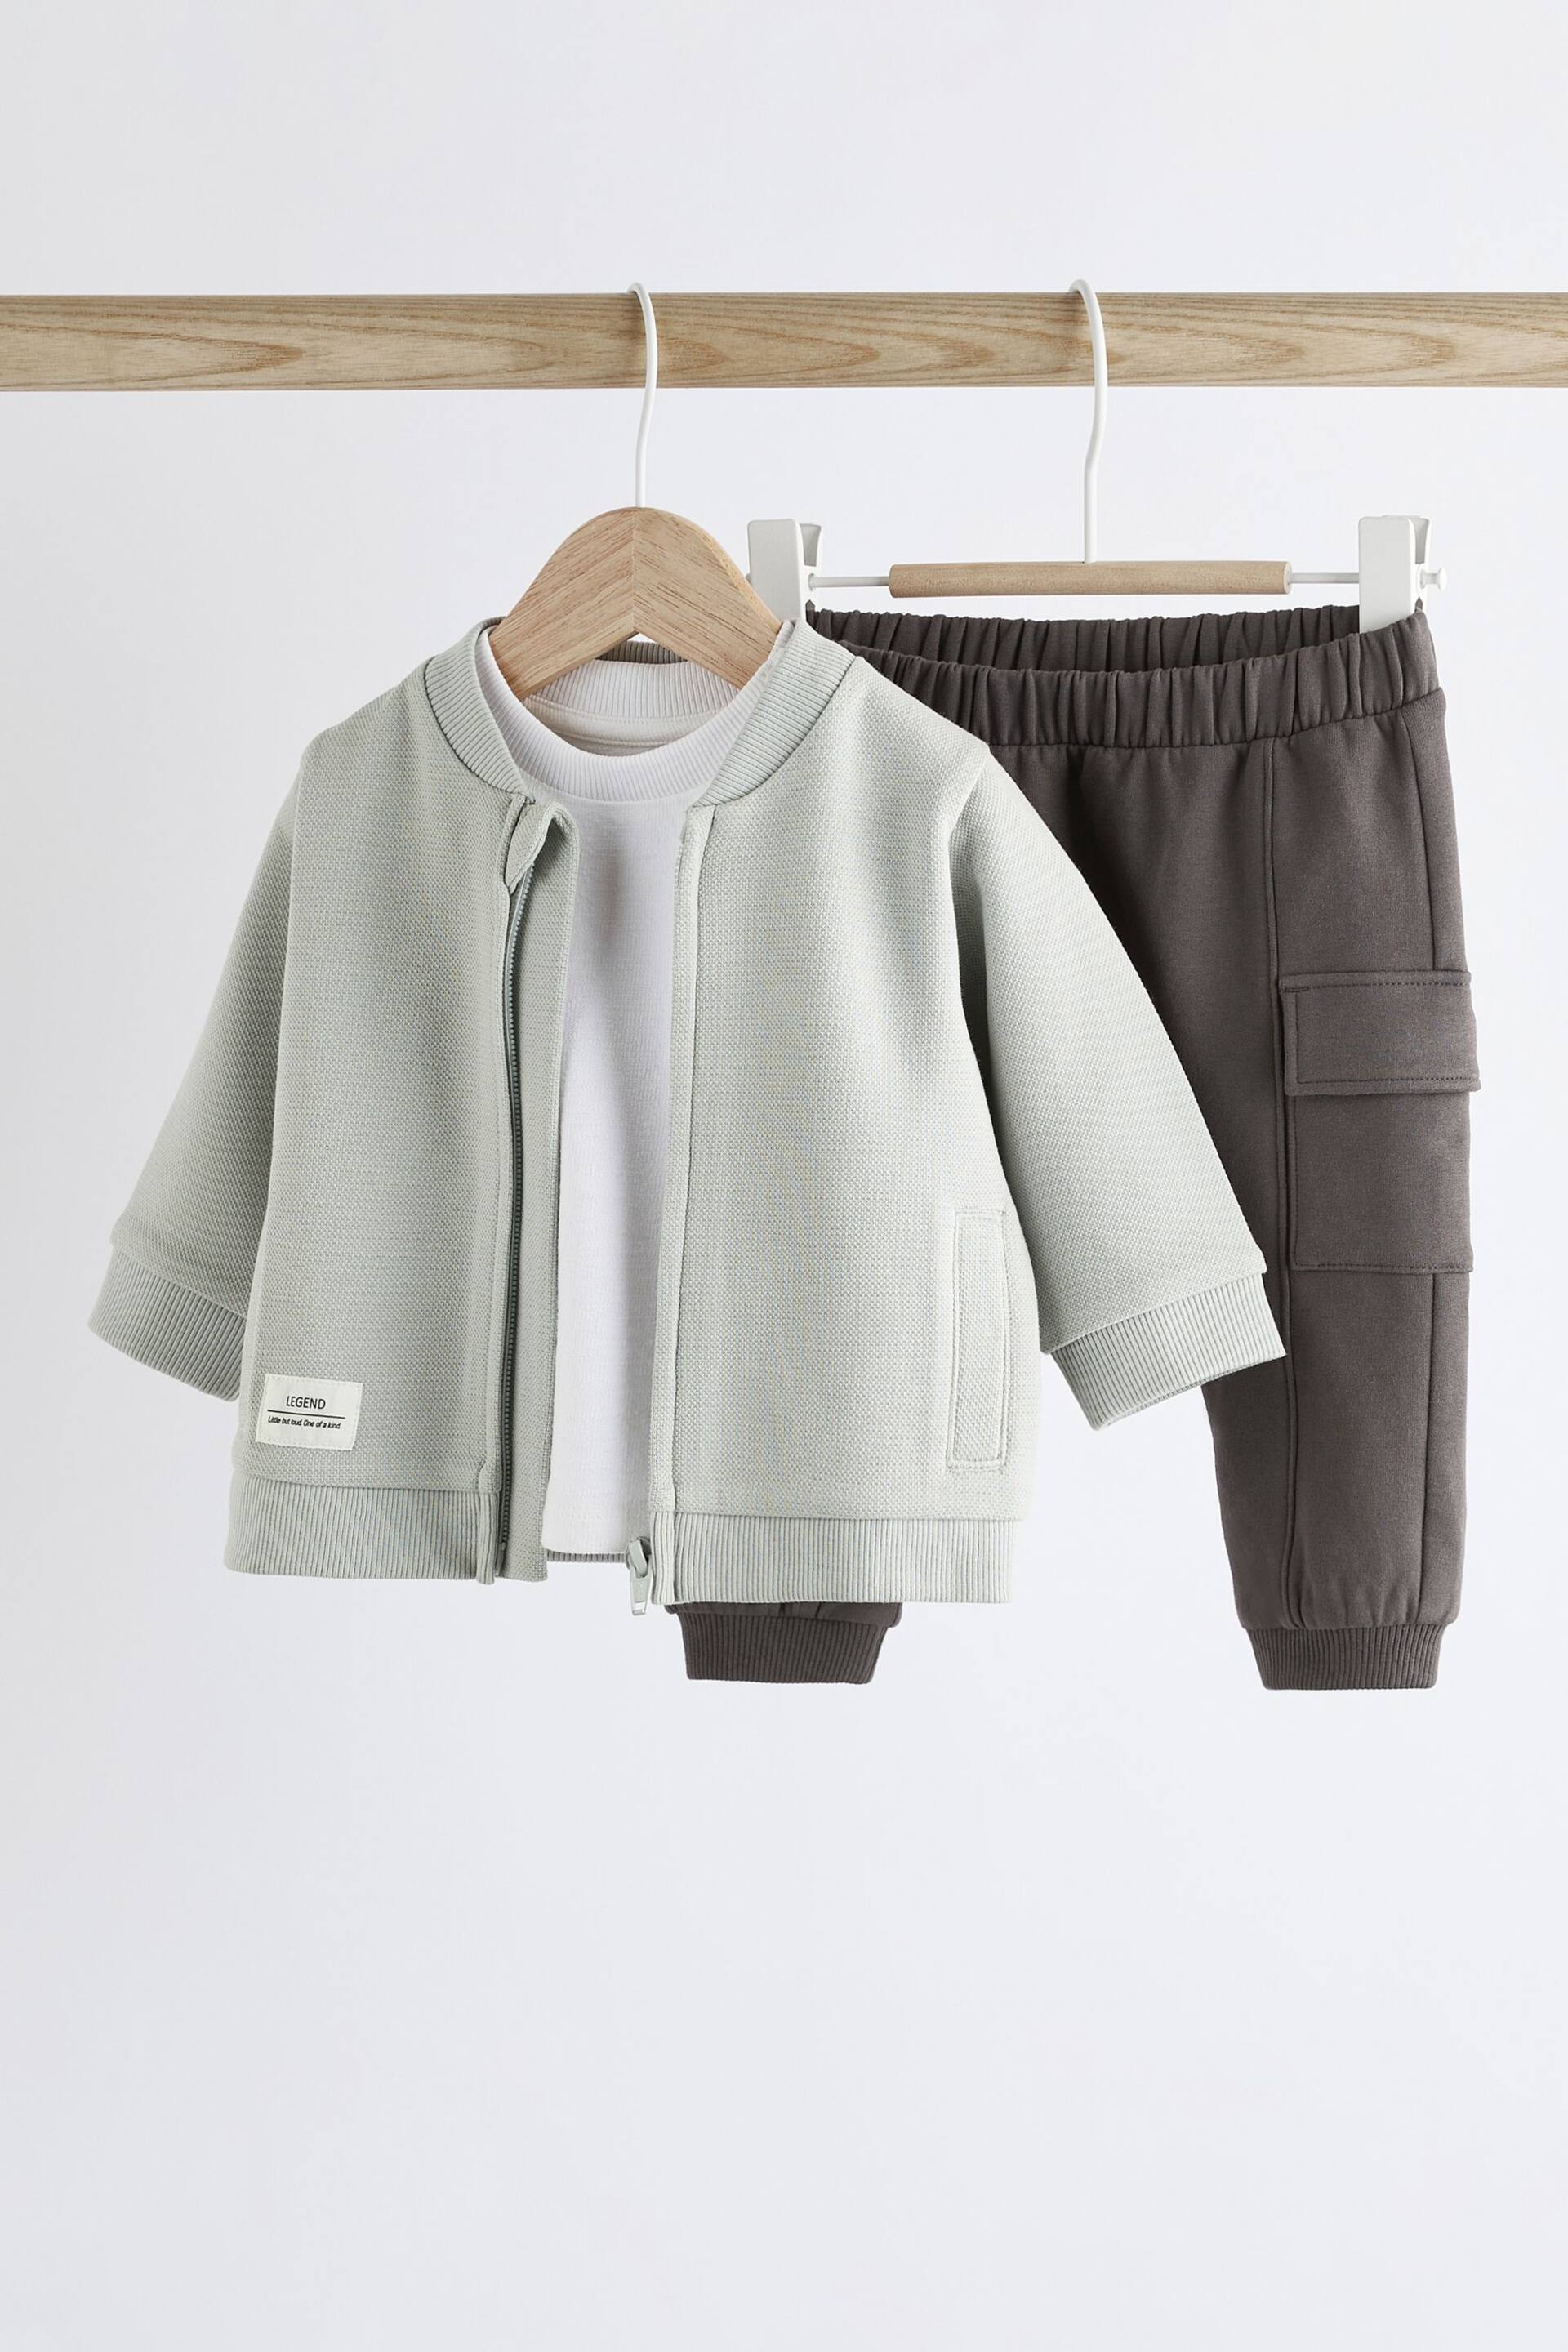 Monochrome Baby Jacket, T-Shirt And Joggers 3 Piece Set - Image 3 of 13